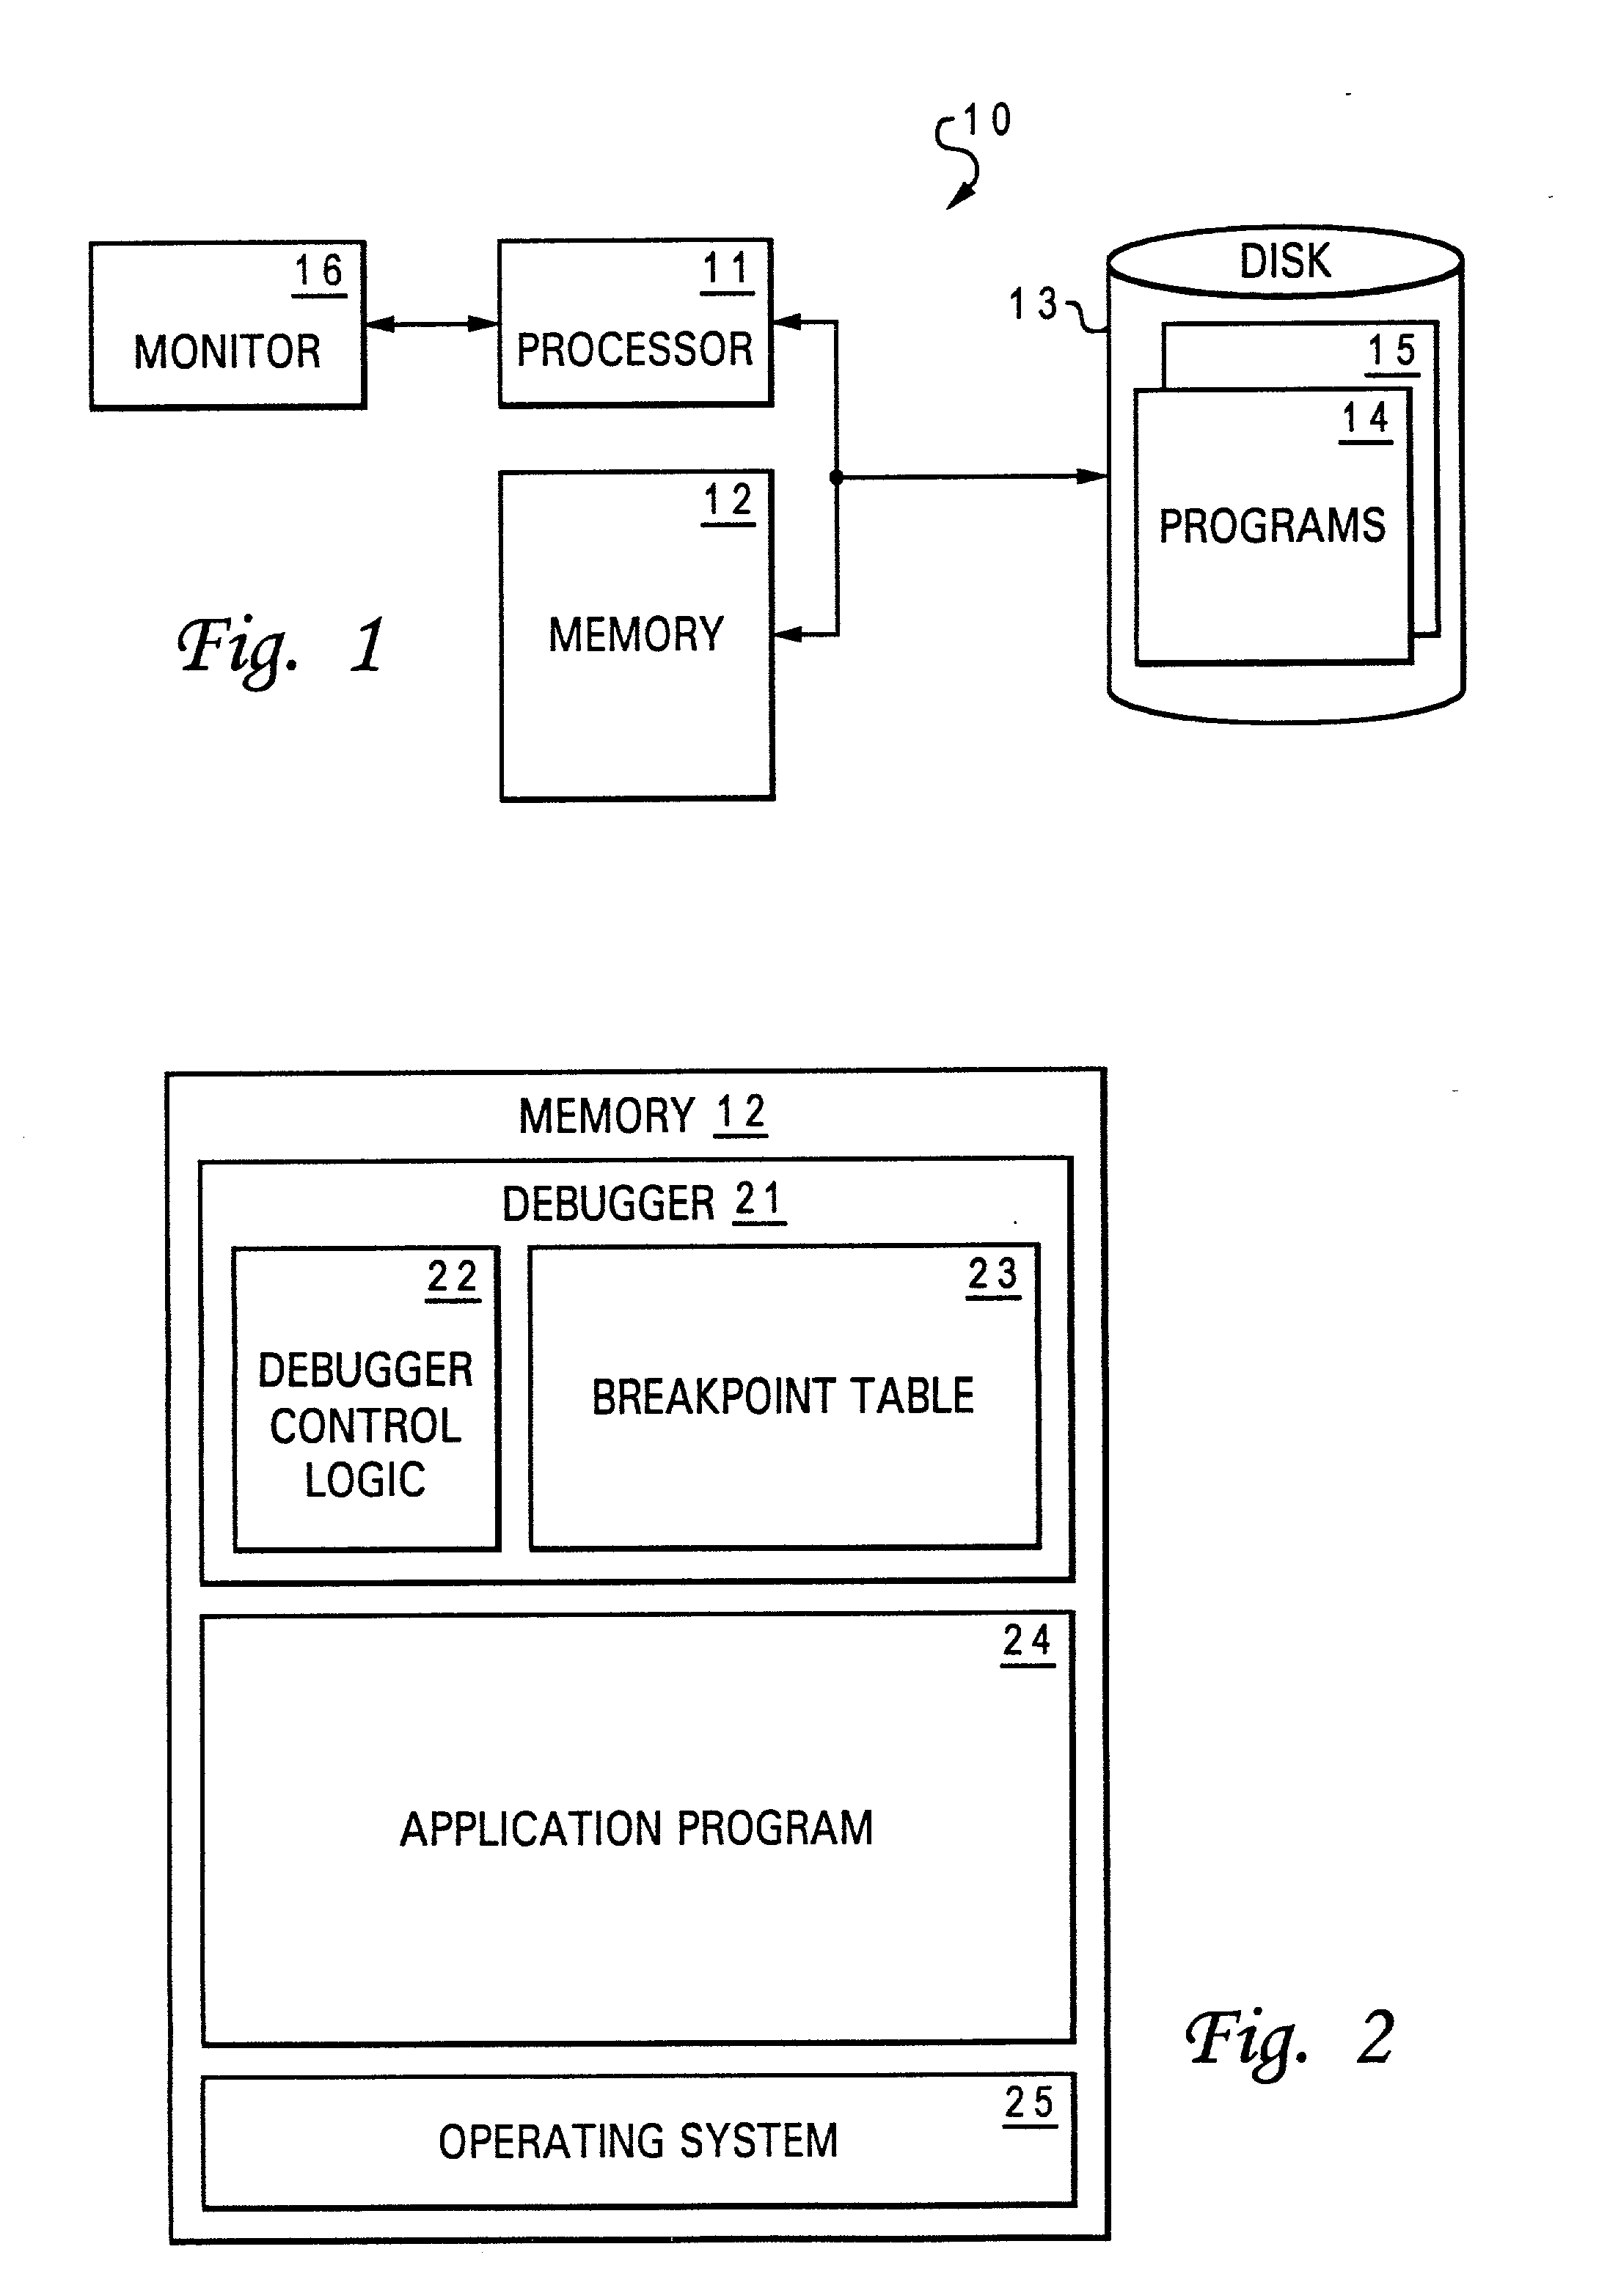 Method for displaying variable values within a software debugger